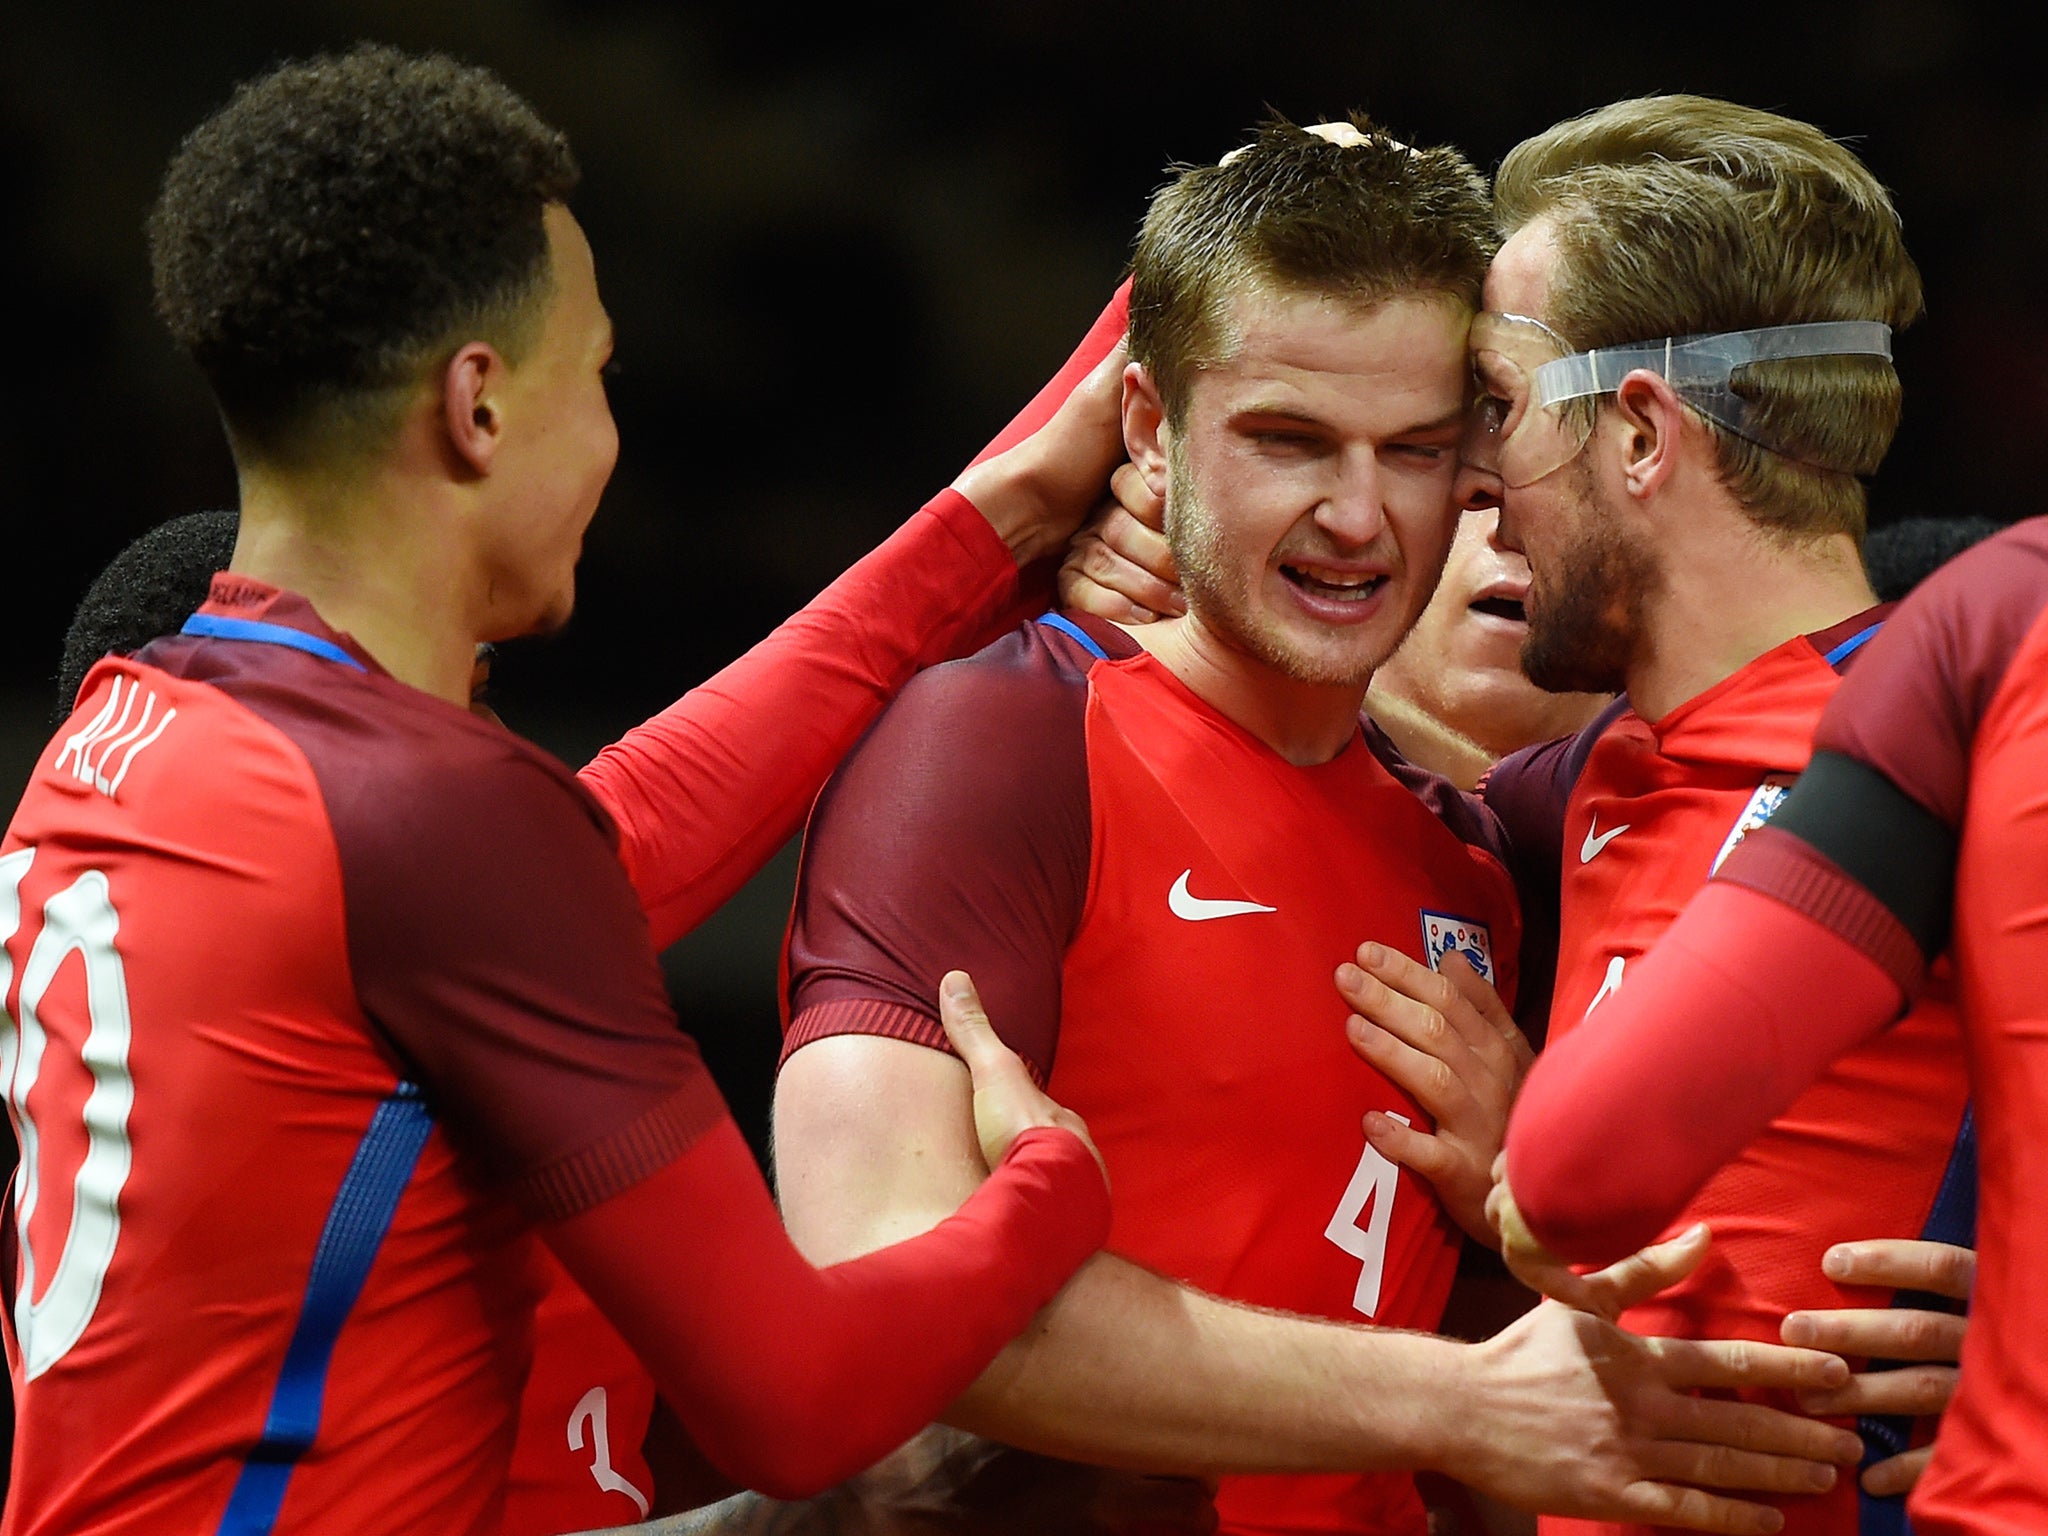 Dele Alli and Harry Kane congratulate club and international team-mate Eric Dier